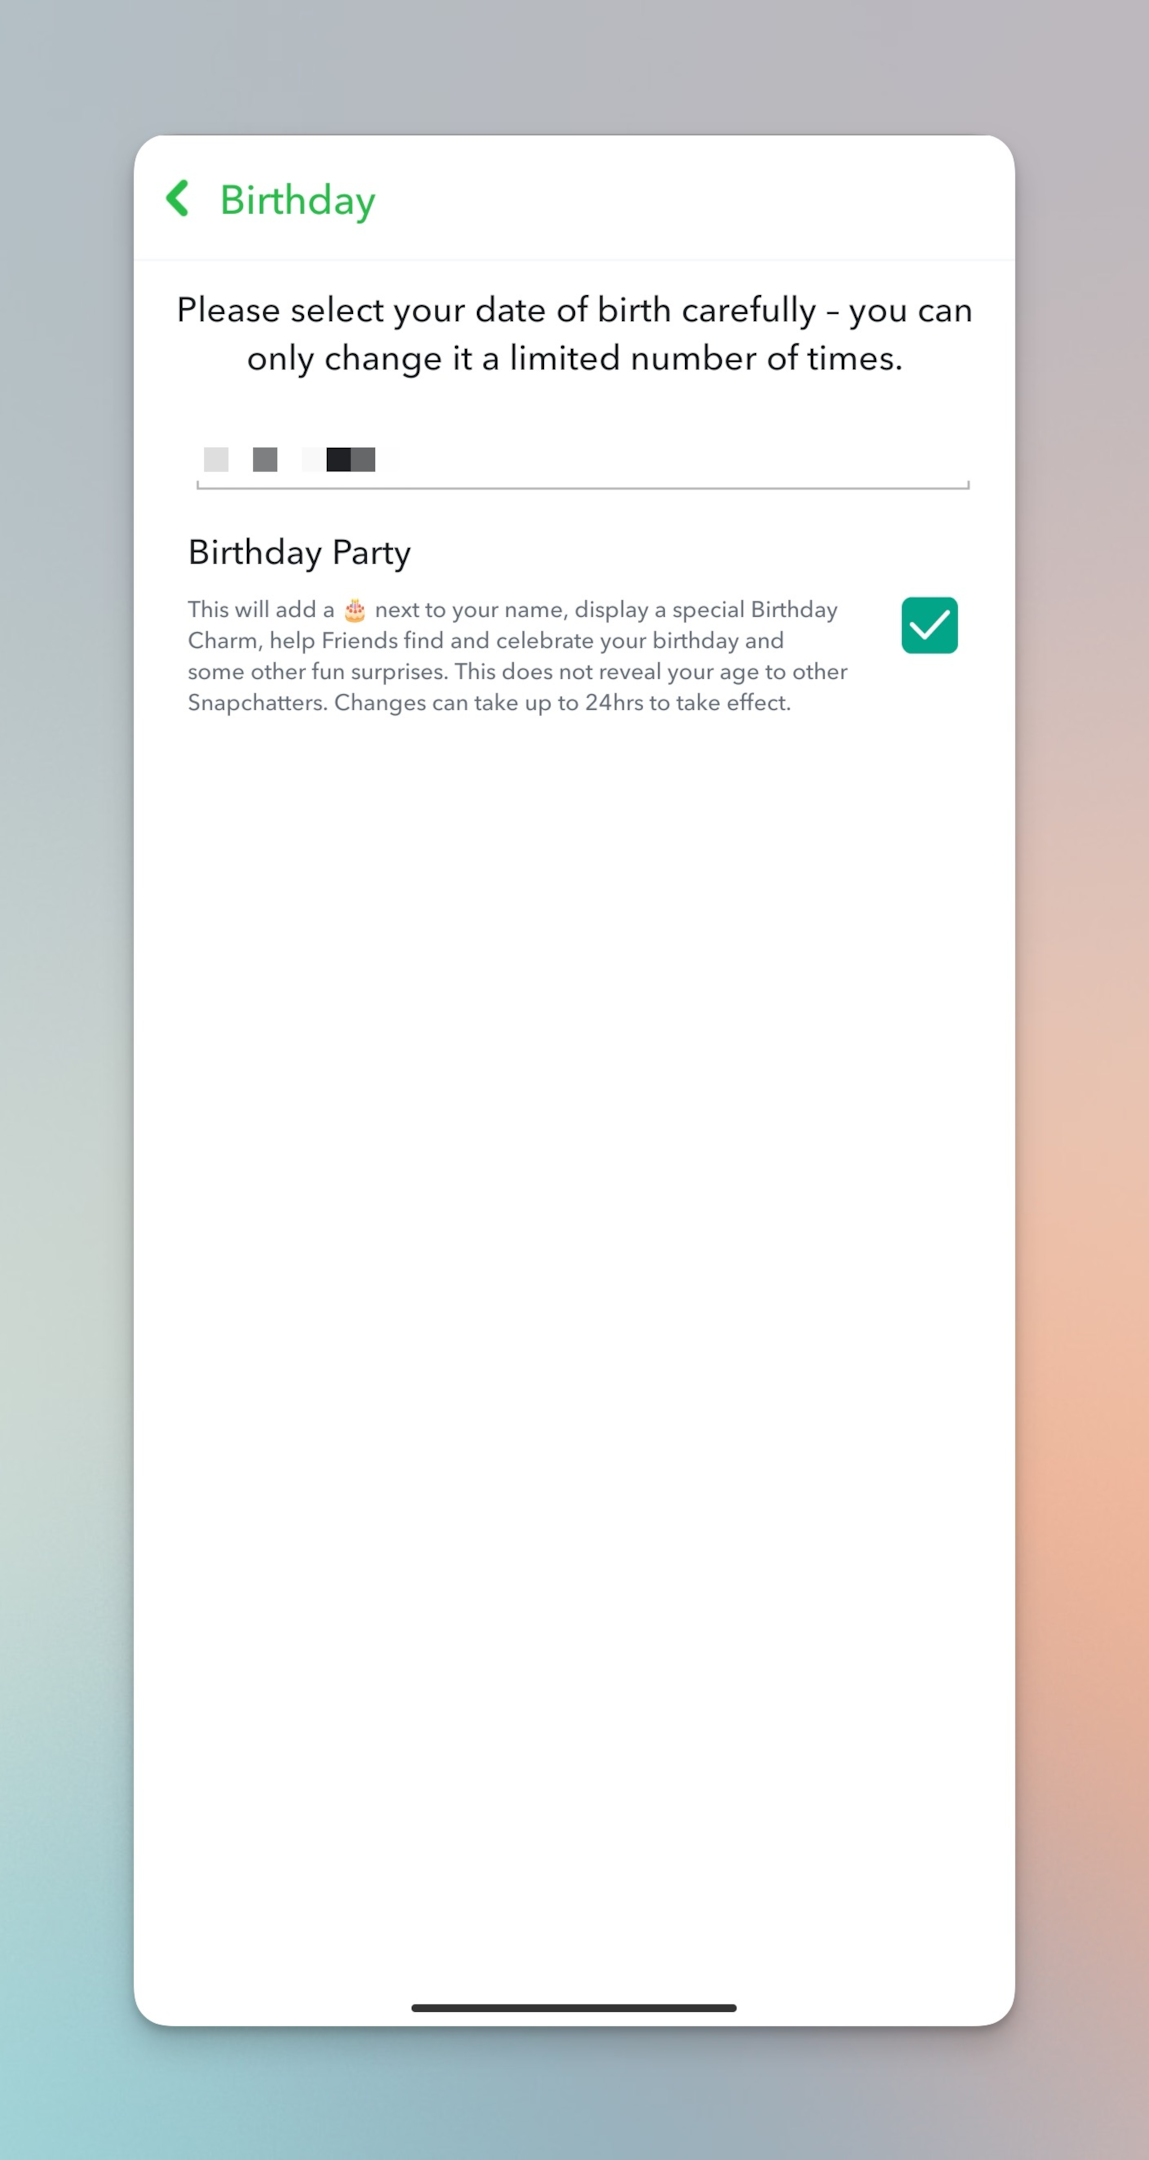 Remote.tools shows the settings page to edit birthday (along with birthday year) on Snapchat 